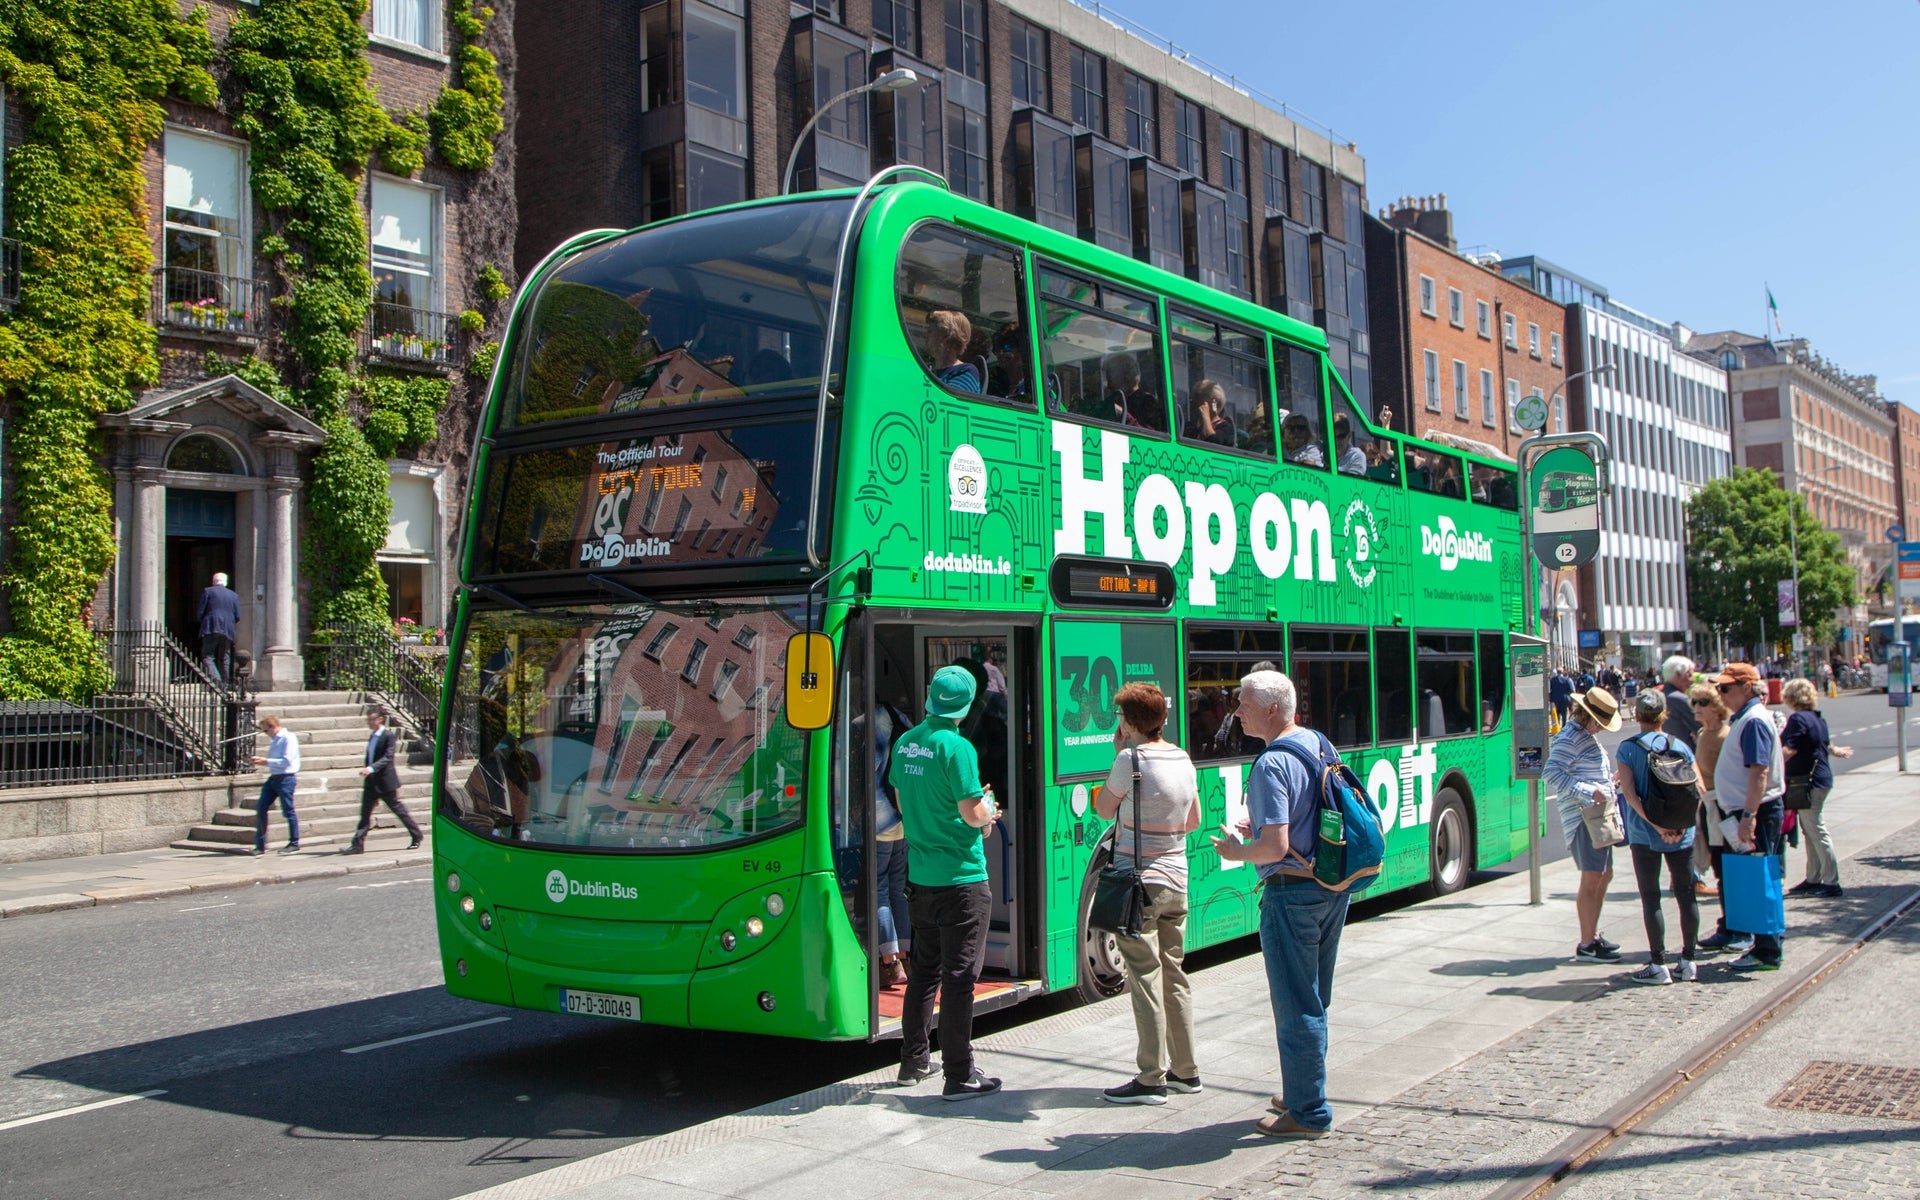 A large green double decker bus with people queueing to get on it